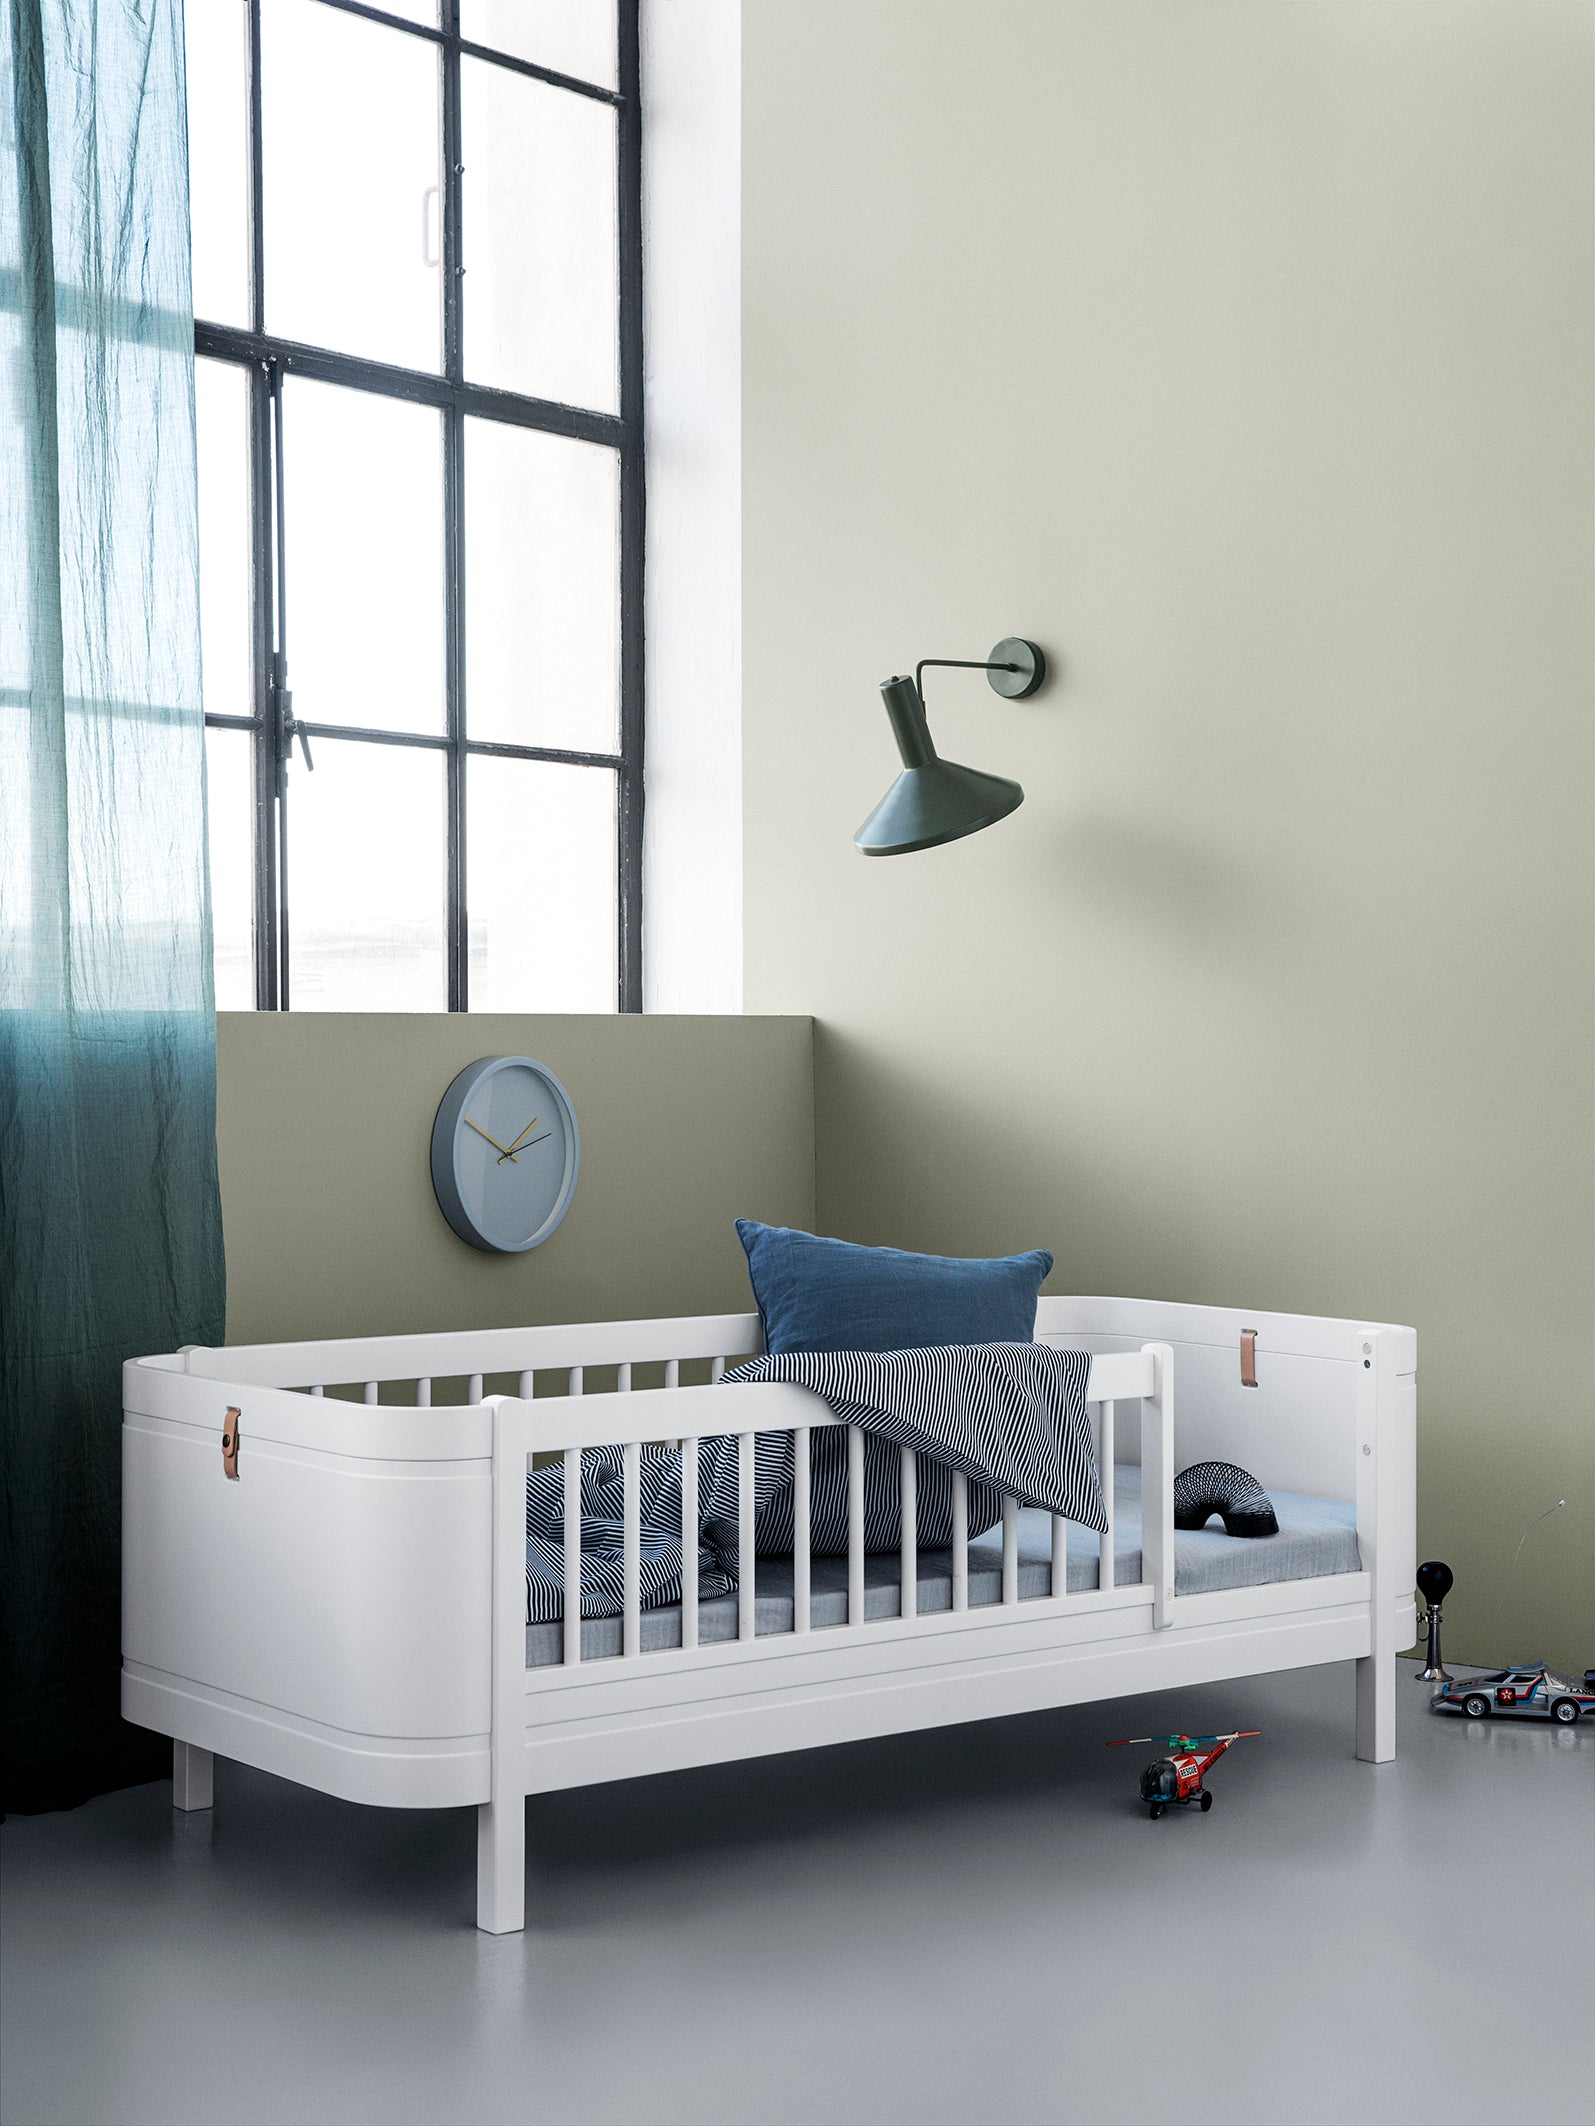 Oliver Furniture Wood Mini+ basic baby bed including conversion set to a junior bed, white/oak or white